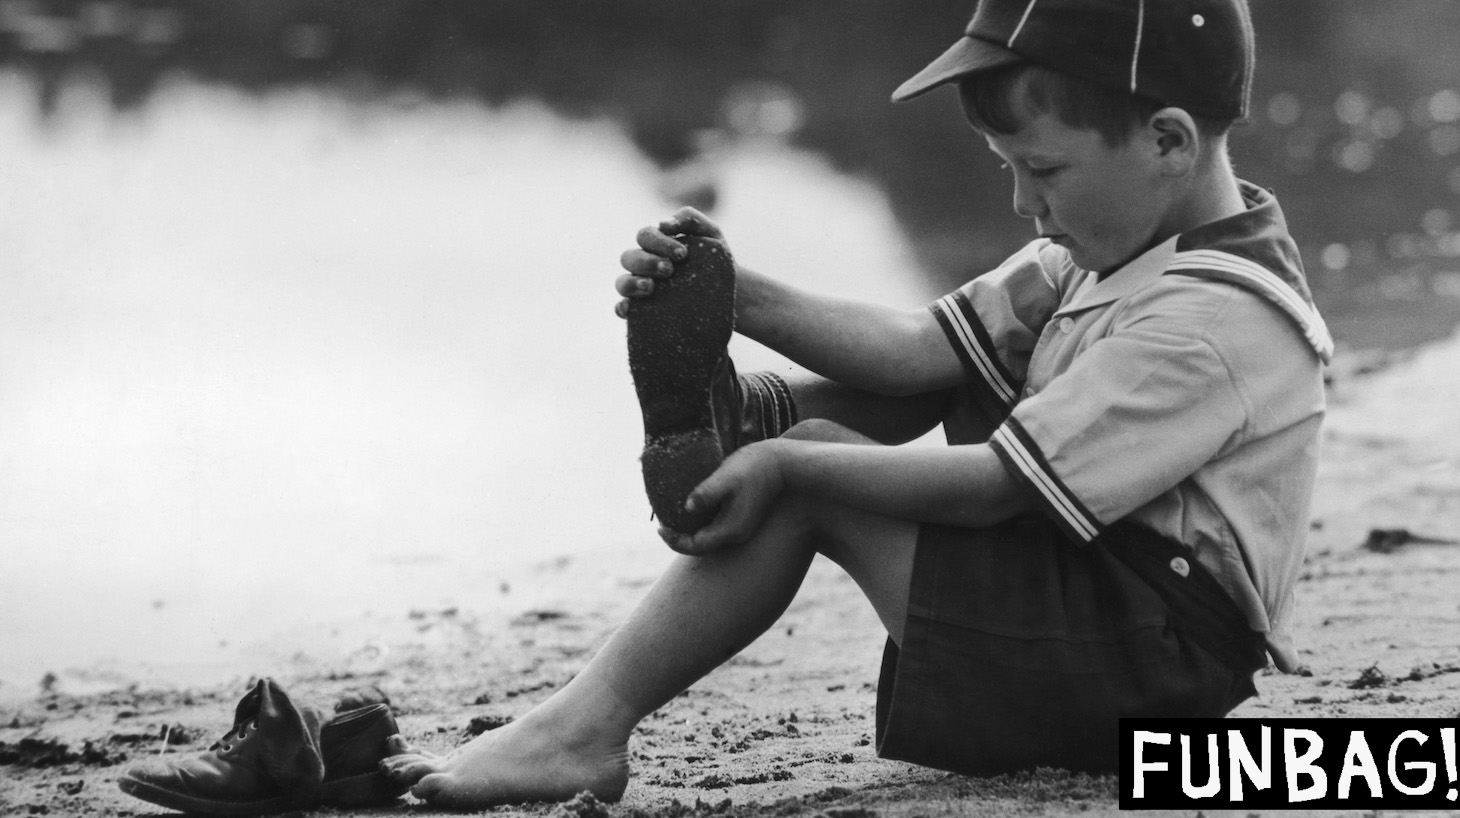 A cub scout takes off his shoes and socks before going for a paddle, circa 1955. (Photo by FPG/Hulton Archive/Getty Images)